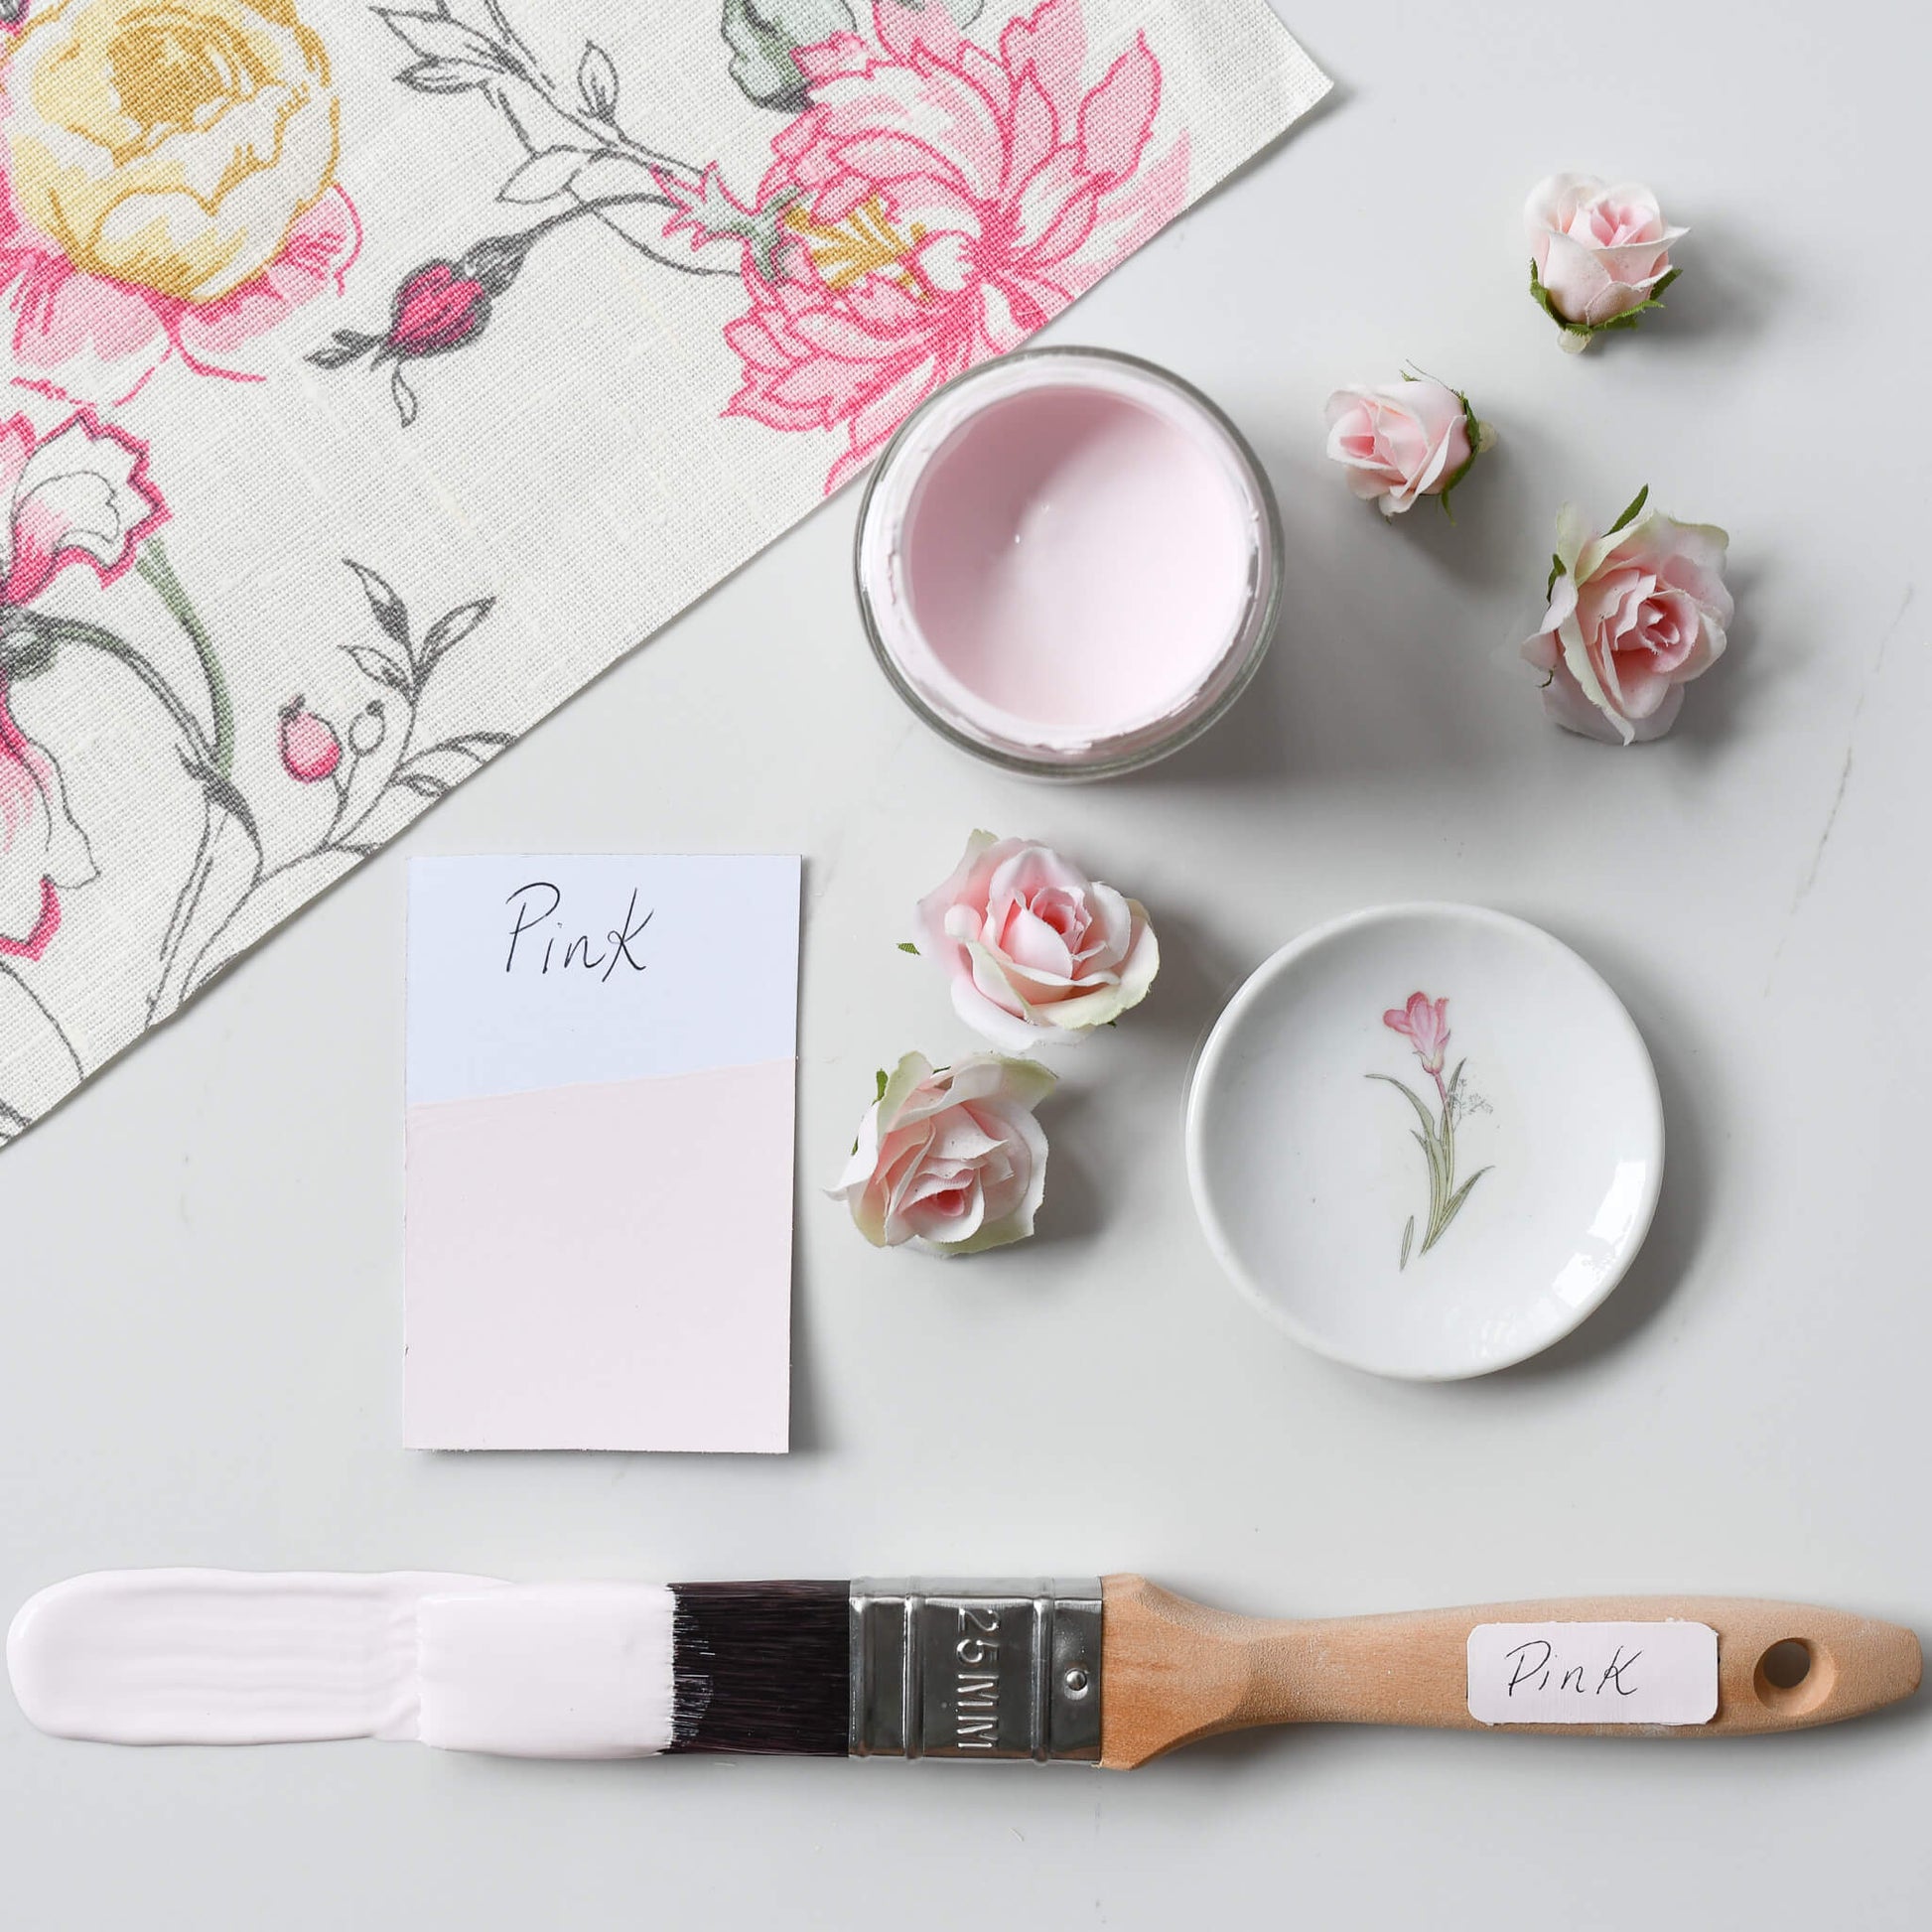 Fabric mood board with paint brush dipped in 120ml pot of Blake & Taylor Pink  Chalk Furniture Paint